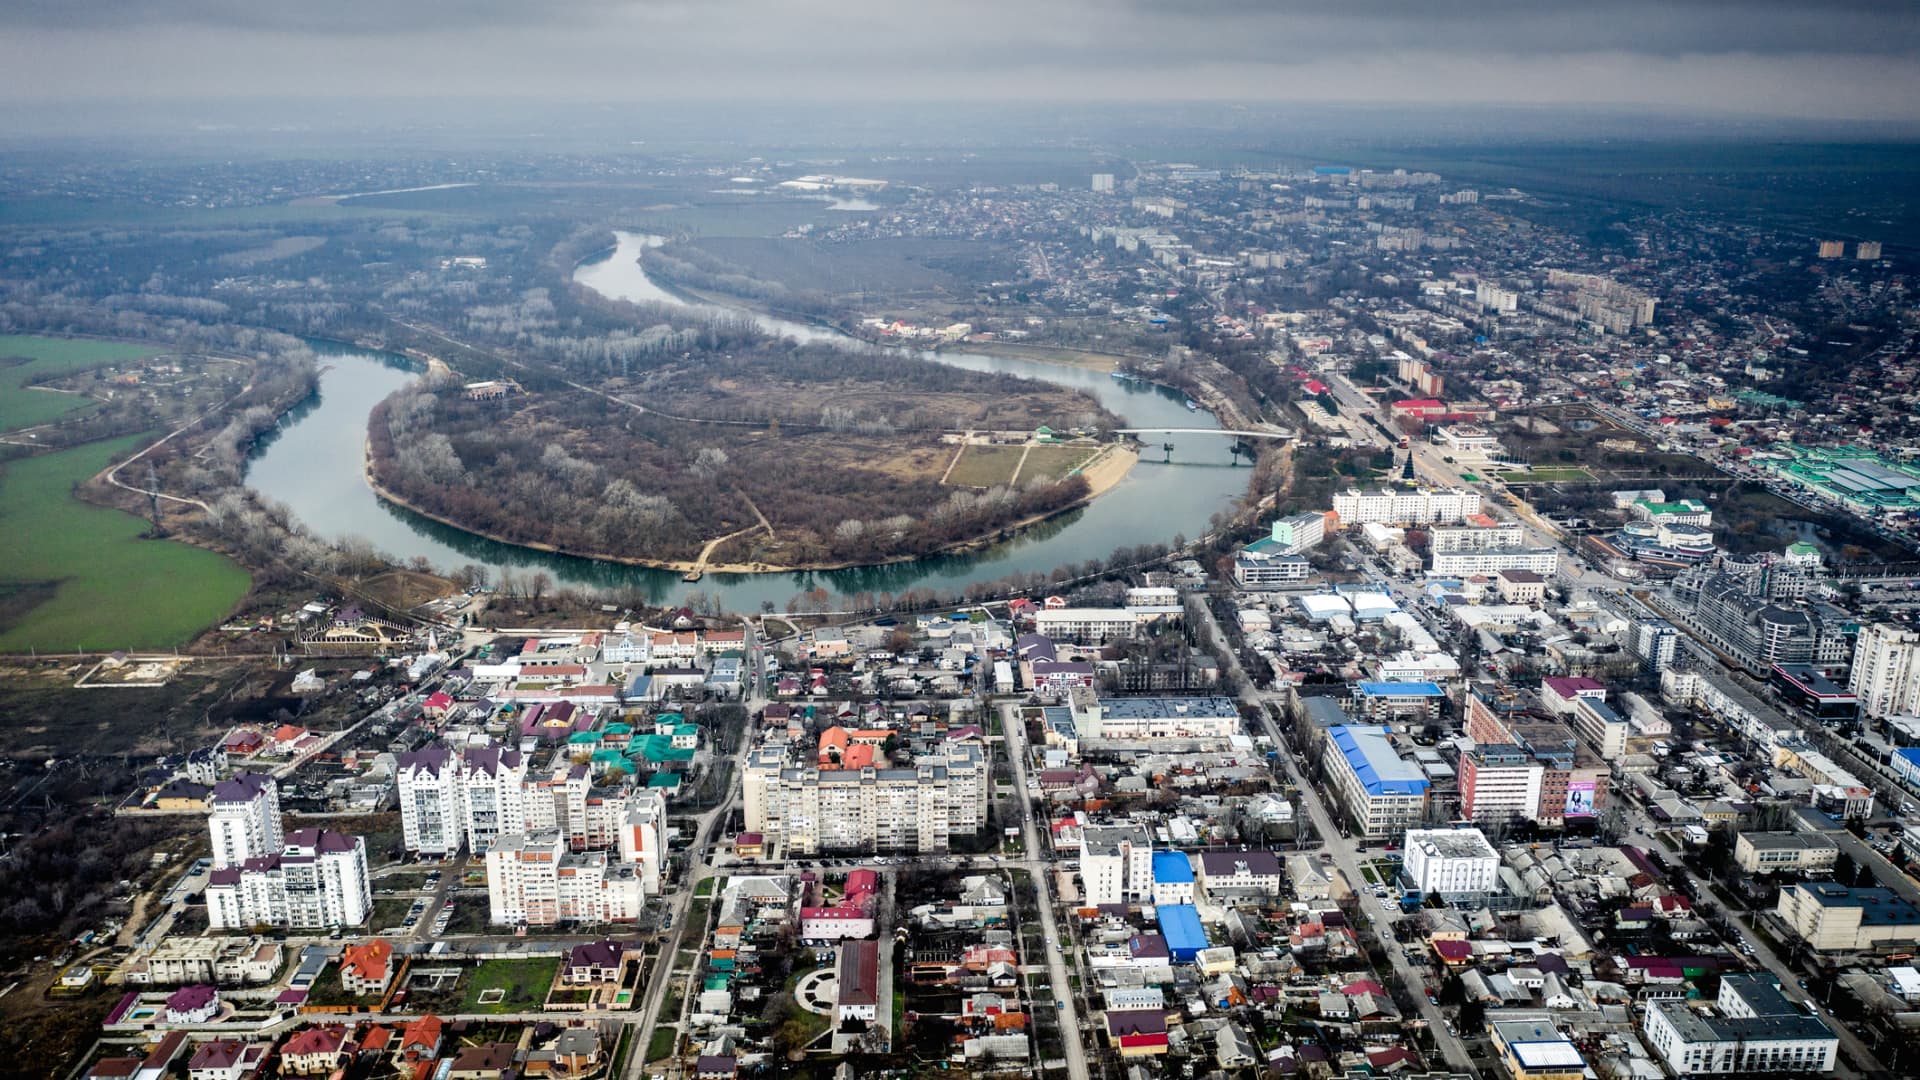 Tiraspol, the capital and largest city in Transnistria, an unrecognized breakaway state in Moldova.